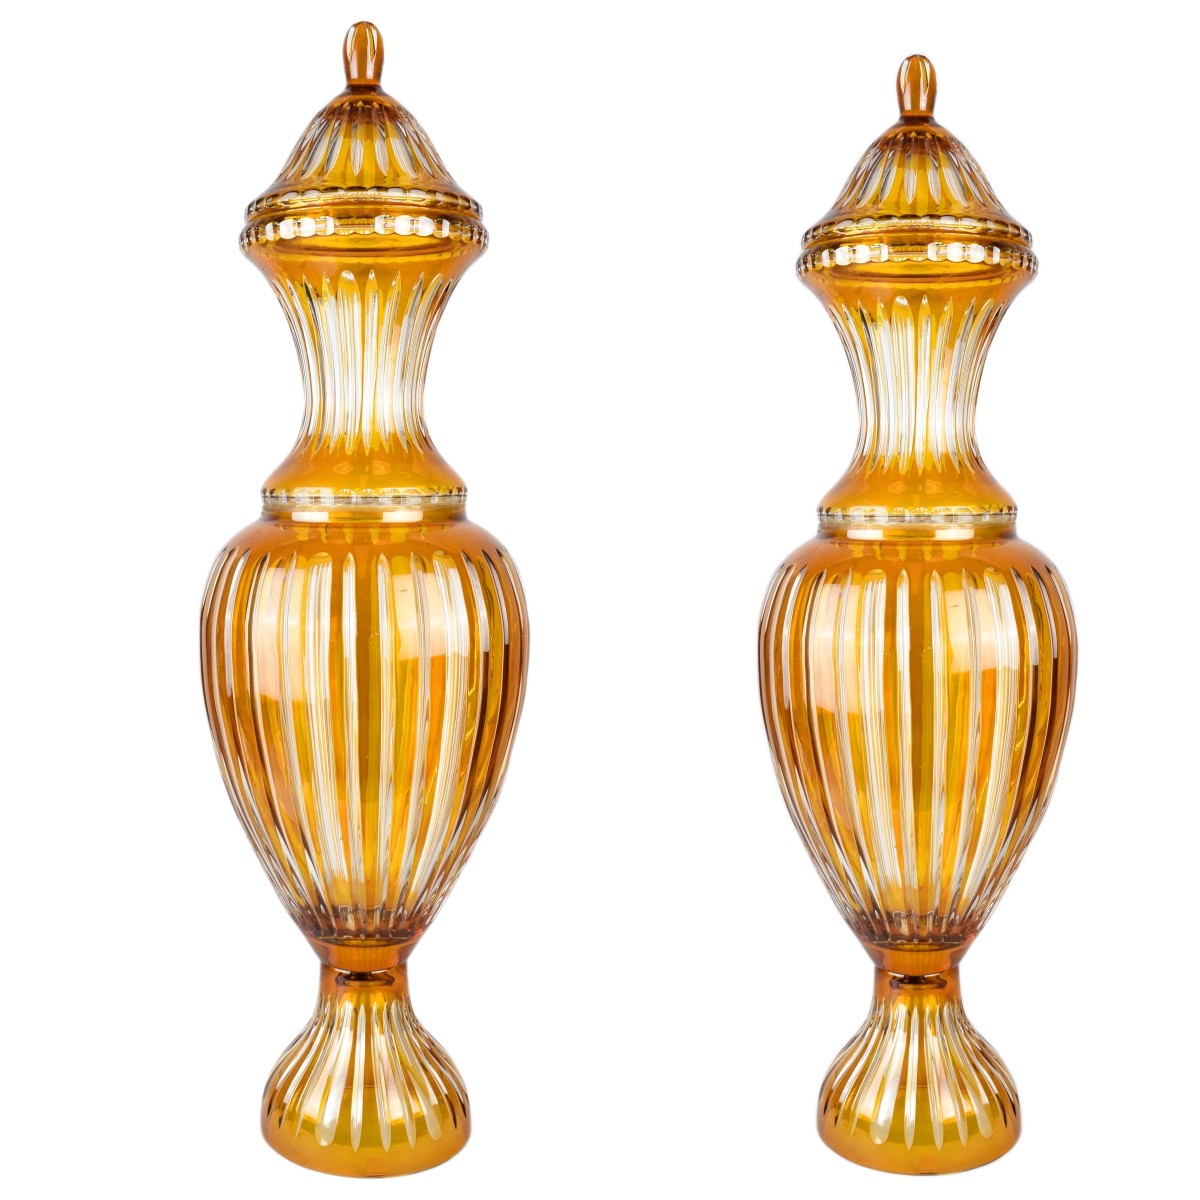 Pair of Bohemian Covered Urns